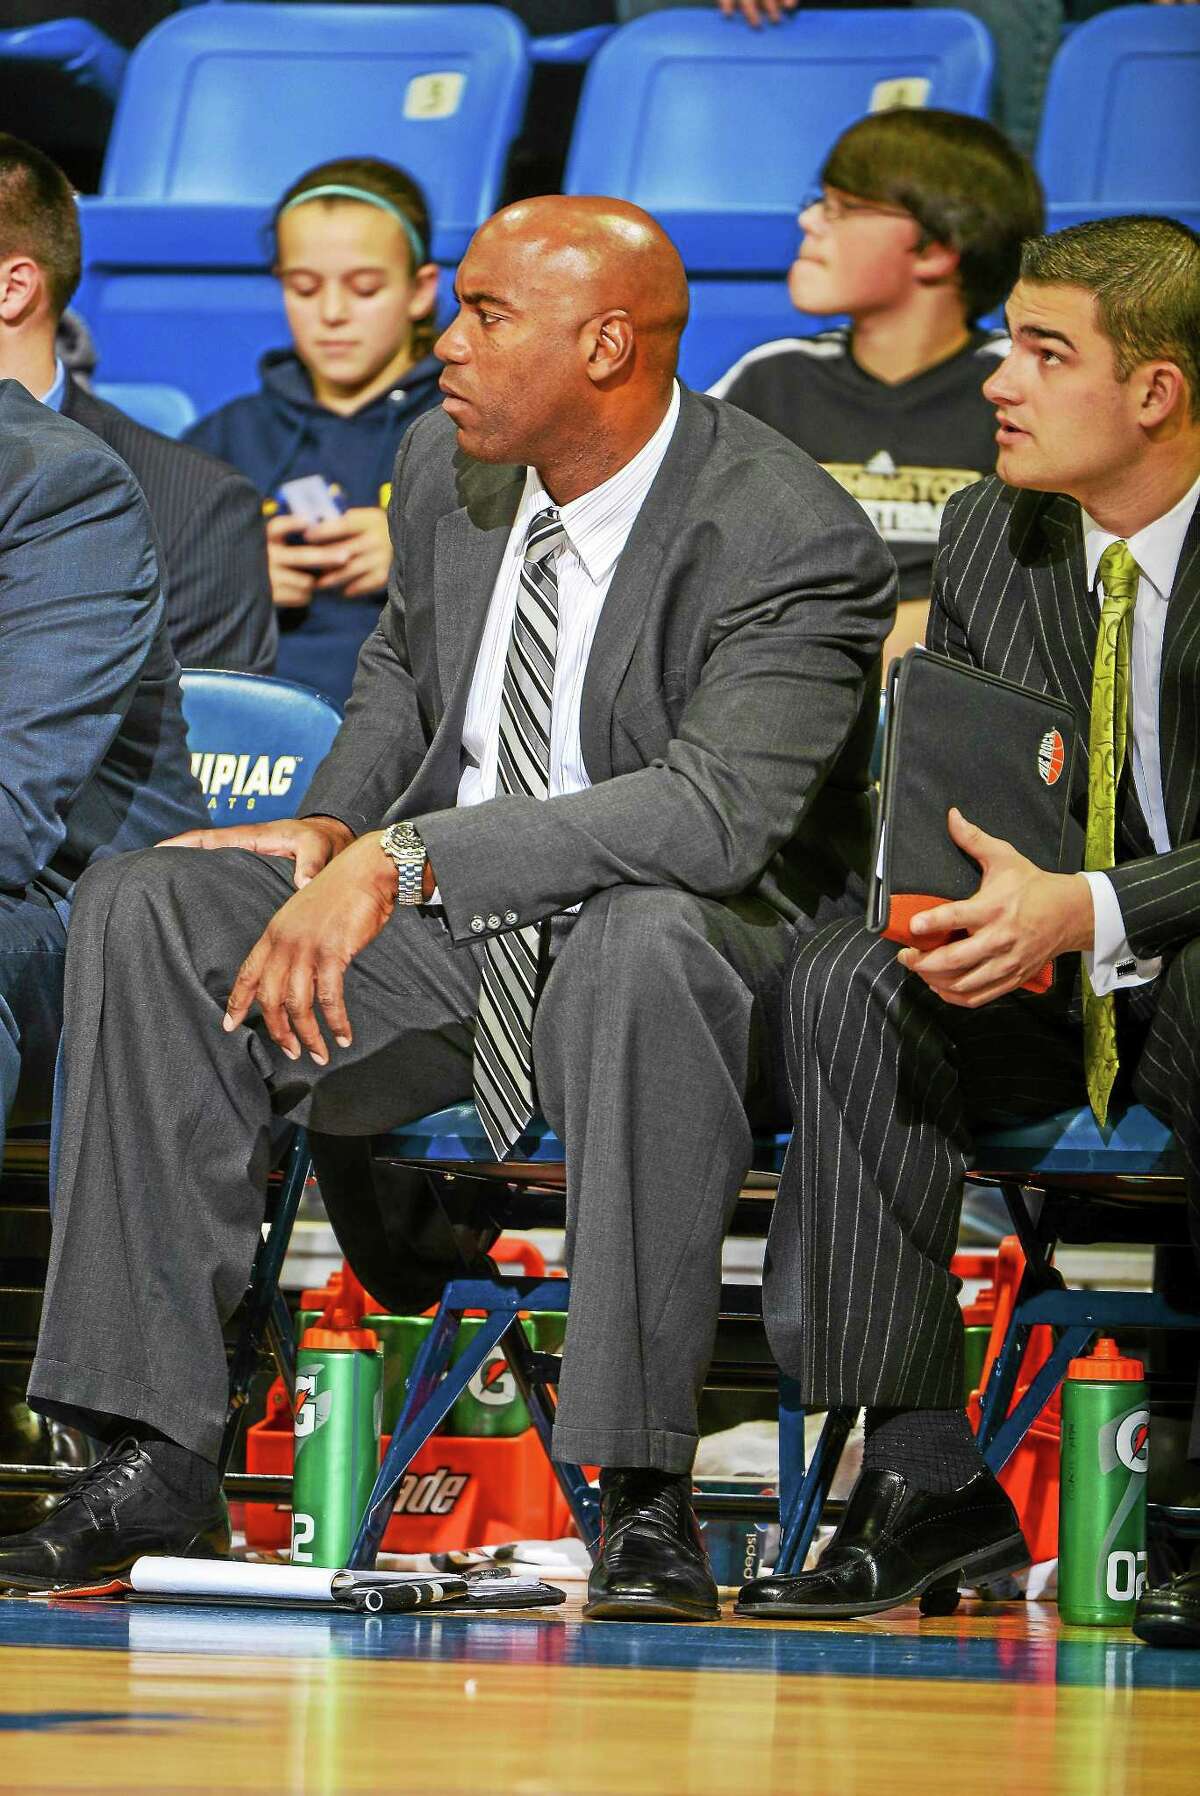 Hamden native and Quinnipiac assistant coach Scott Burrell is expected to be the next Southern Connecticut State men’s basketball head coach.